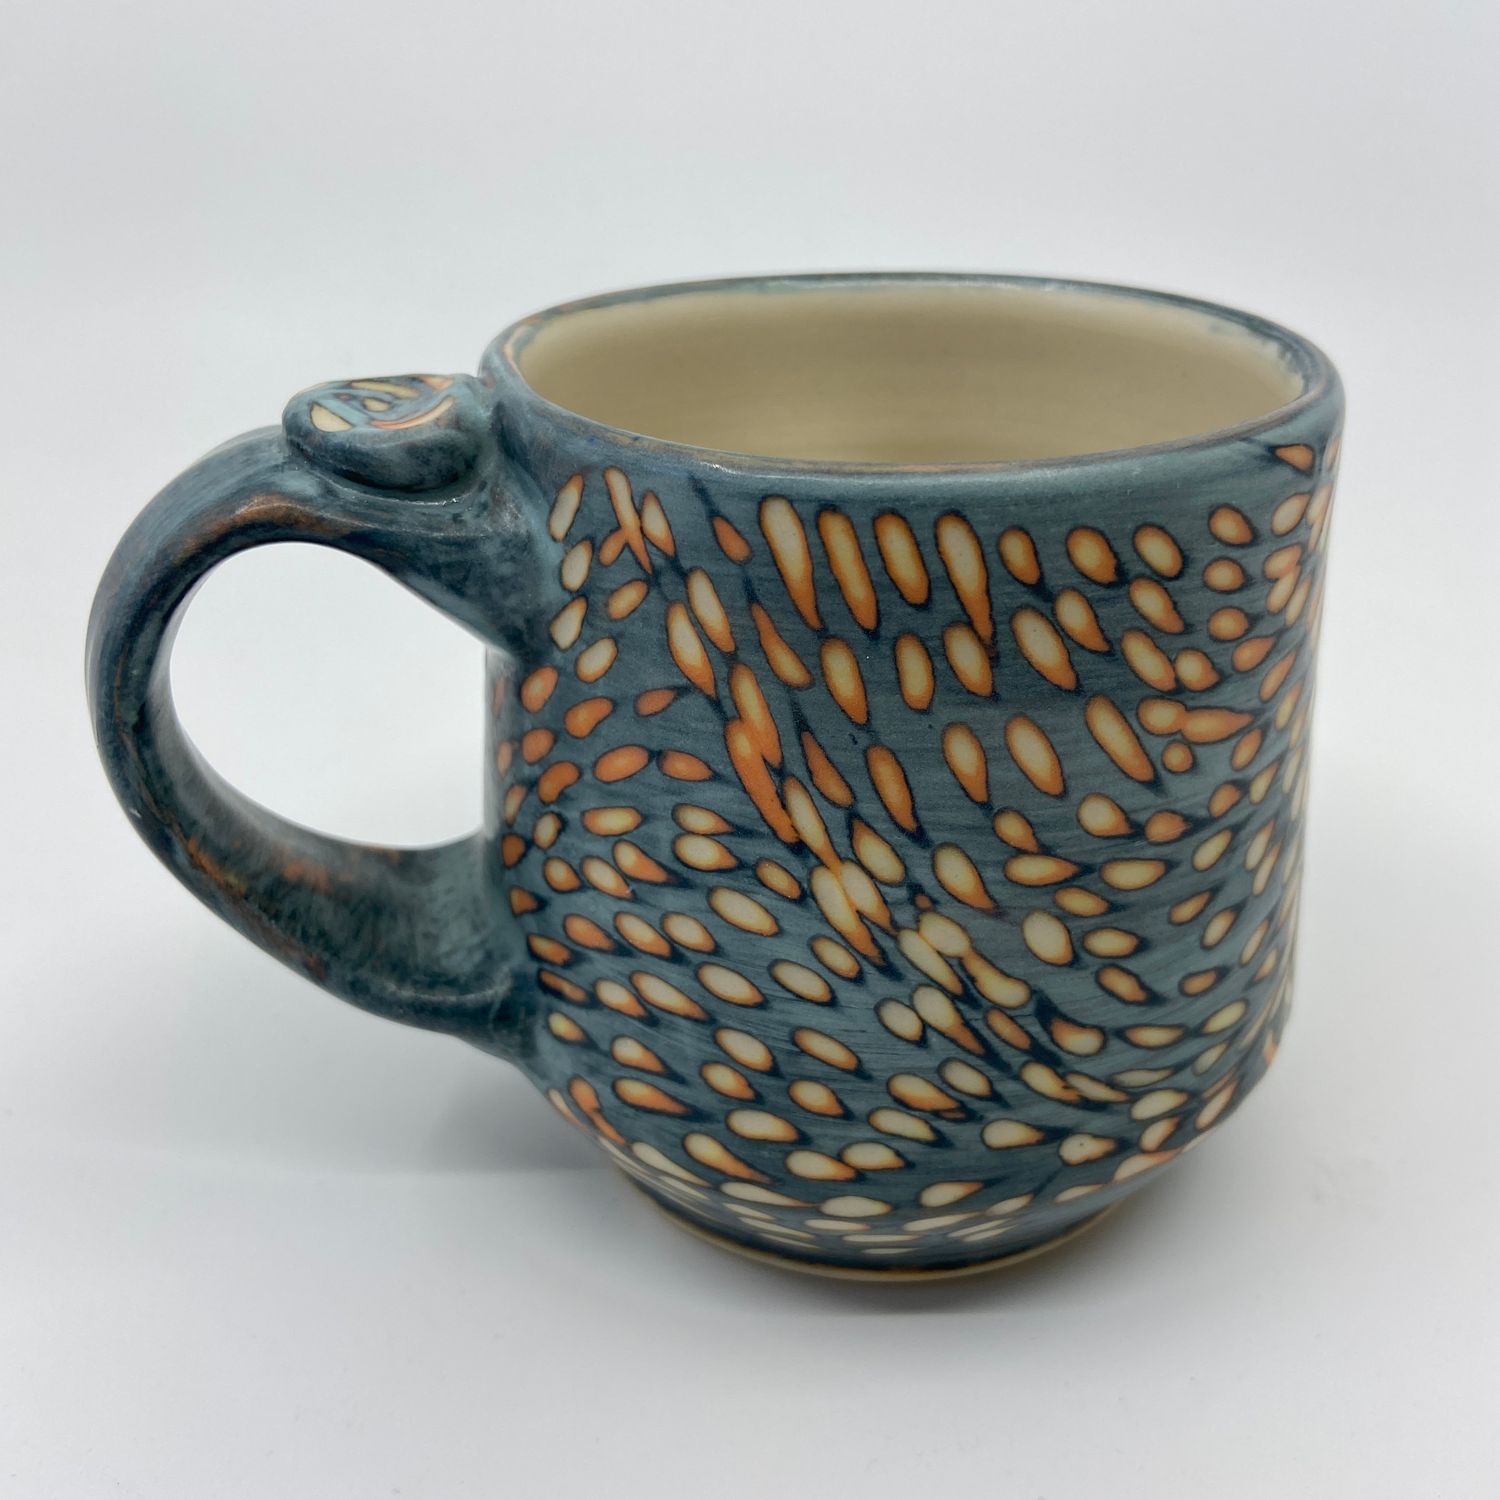 Teresa Dunlop: Carved Belly Button Mug with House Motif Product Image 2 of 3